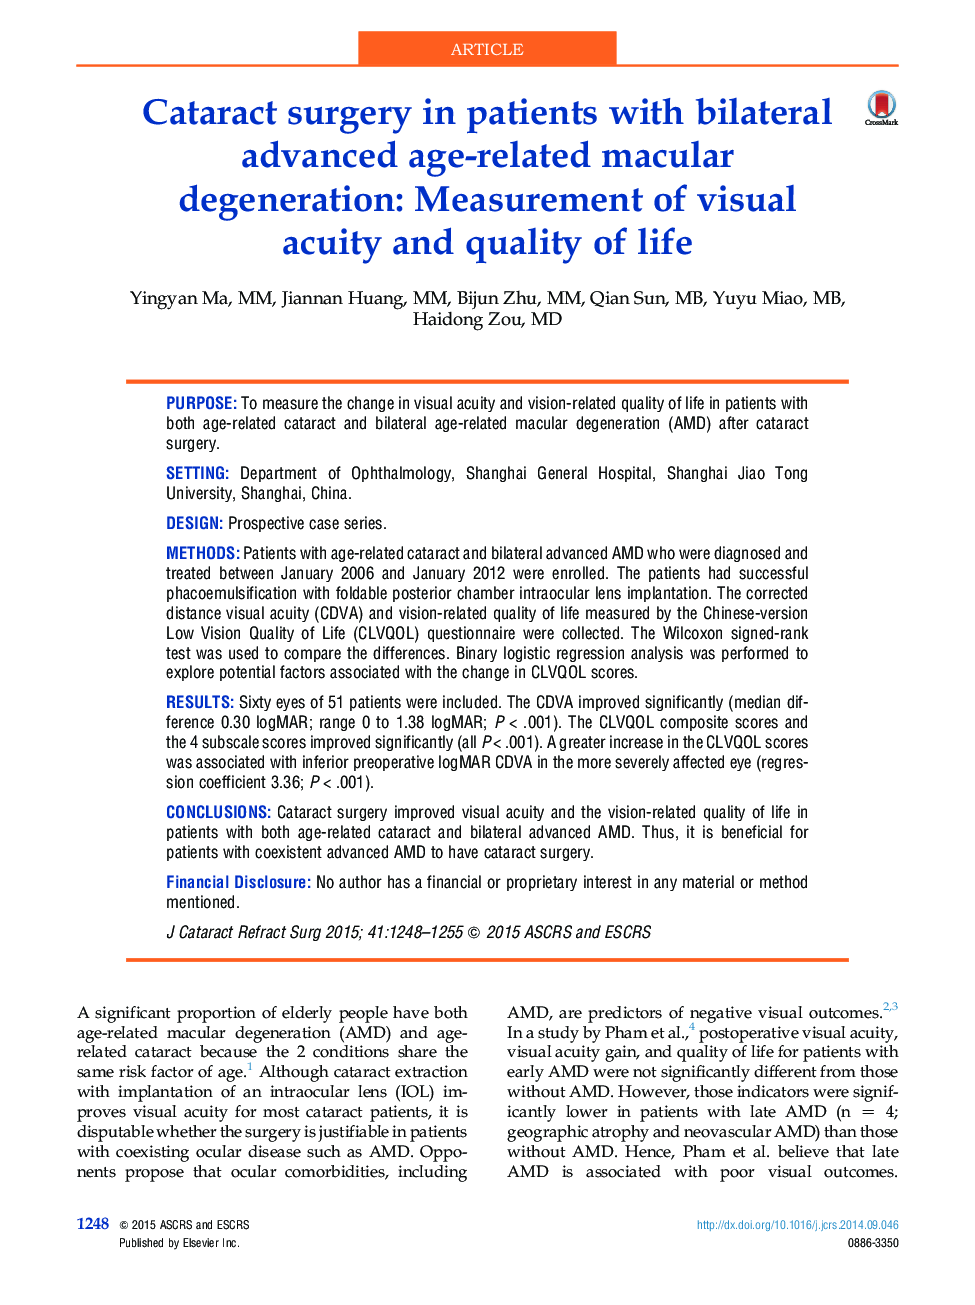 Cataract surgery in patients with bilateral advanced age-related macular degeneration: Measurement of visual acuity and quality of life